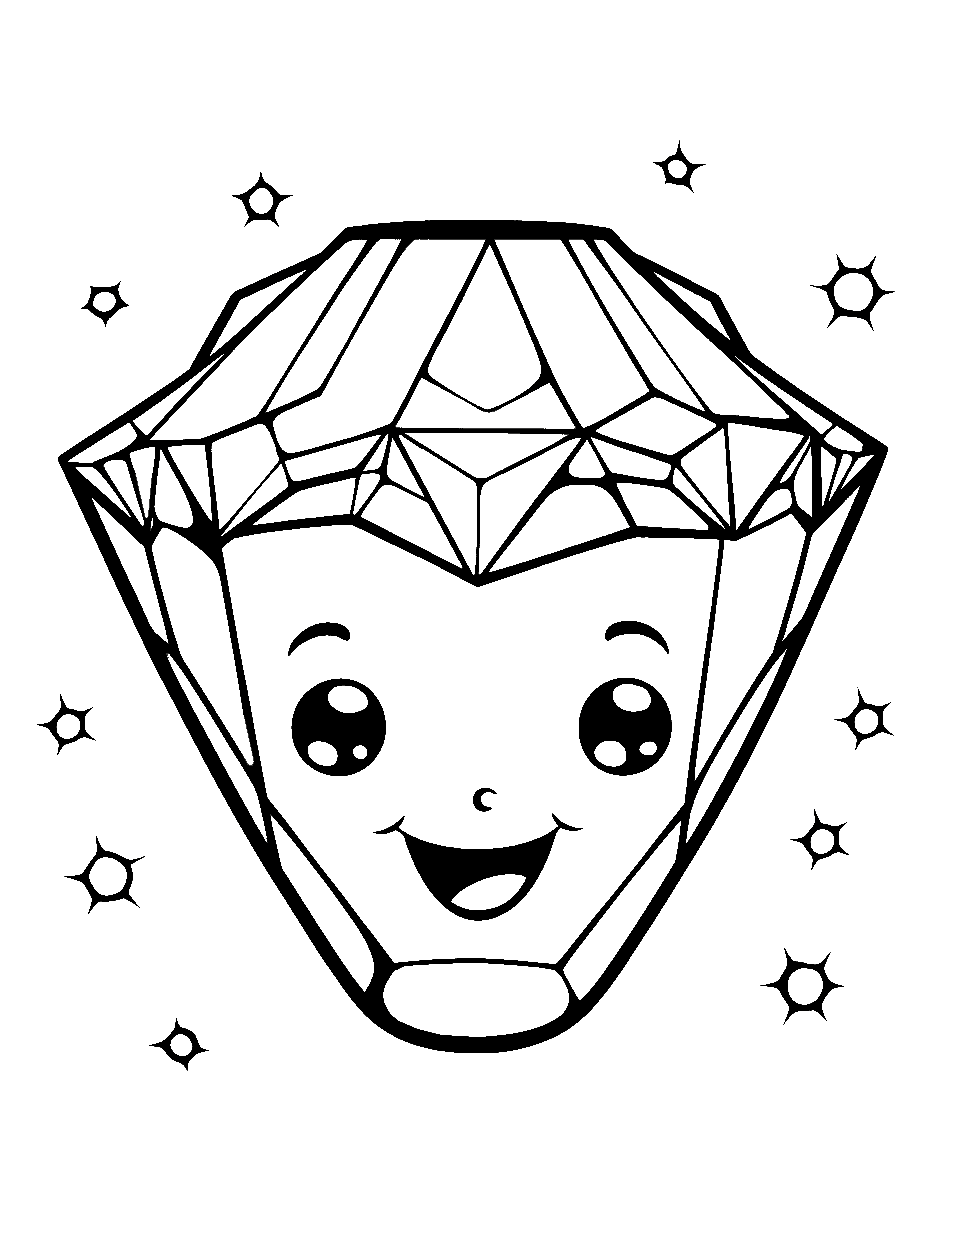 Limited Edition Gem Coloring Page - A sparkling gem with a happy face, surrounded by a radiant shine.